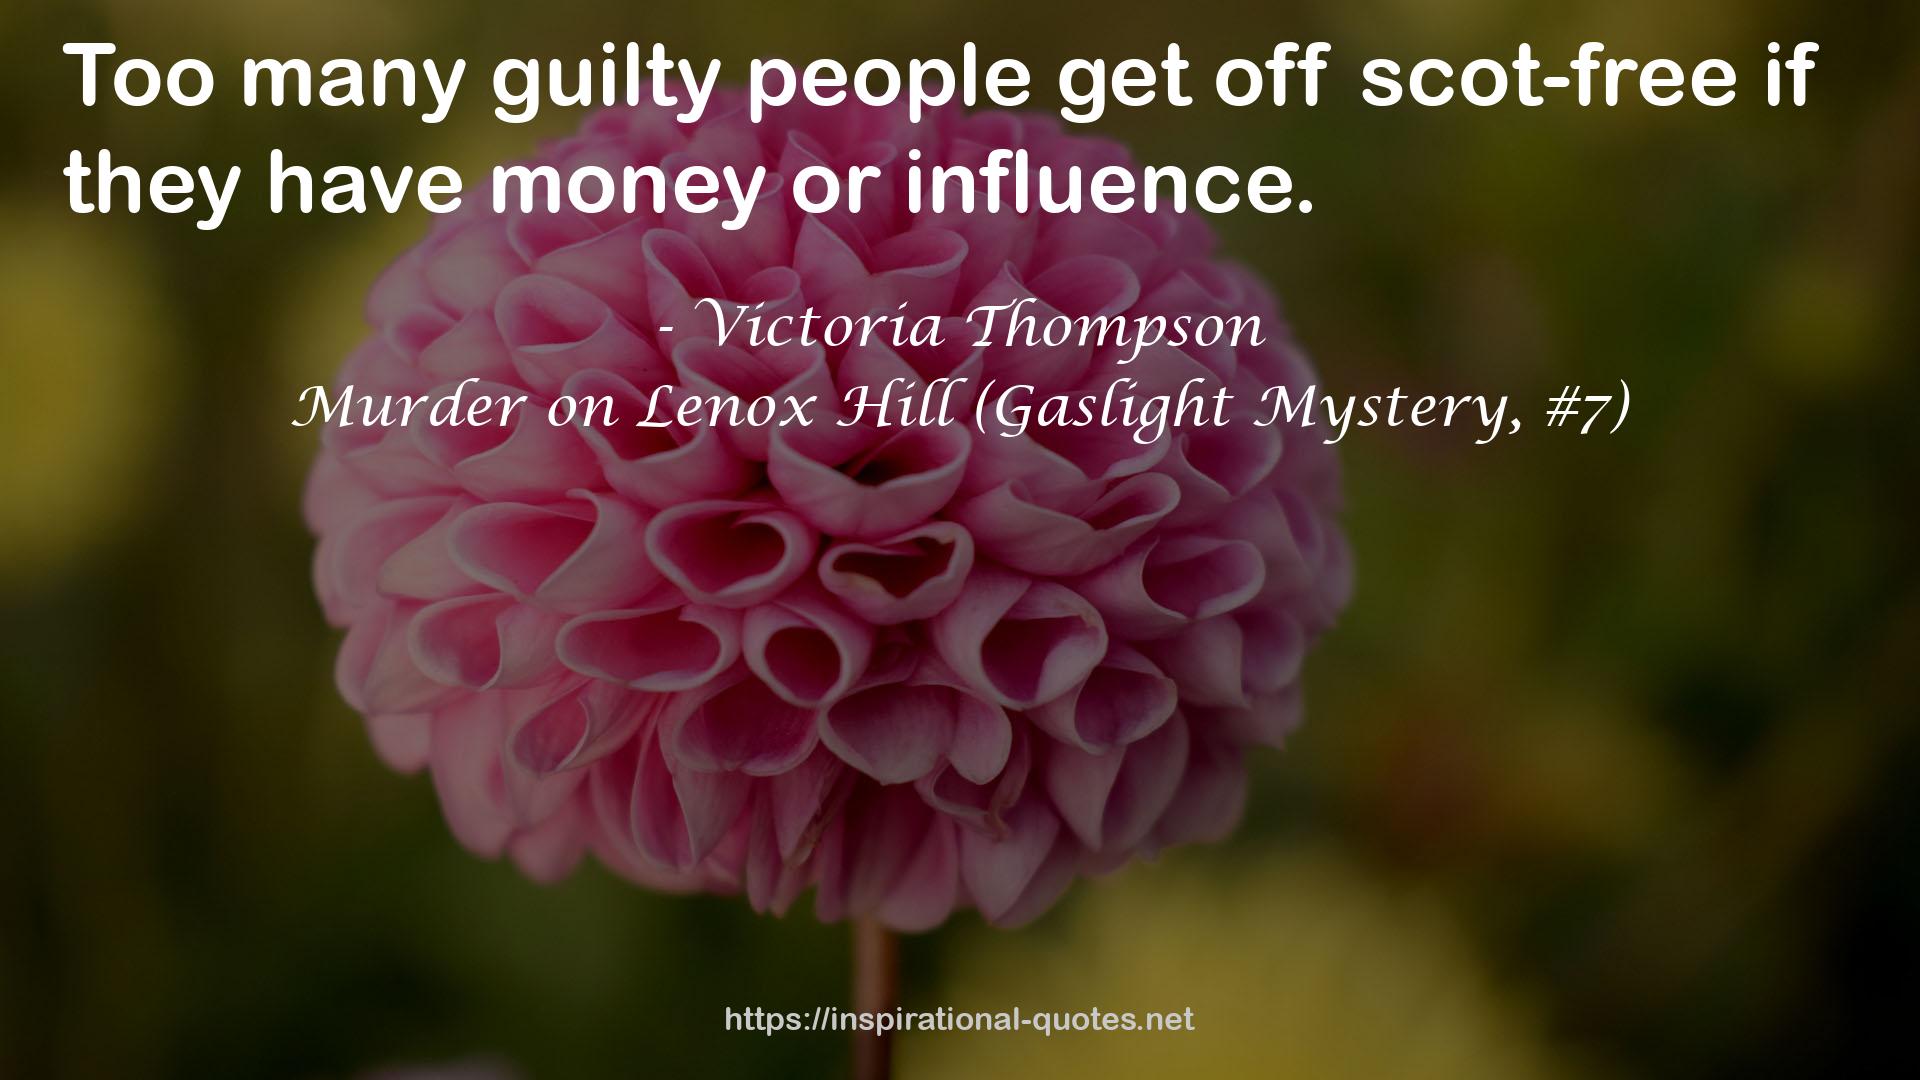 Murder on Lenox Hill (Gaslight Mystery, #7) QUOTES